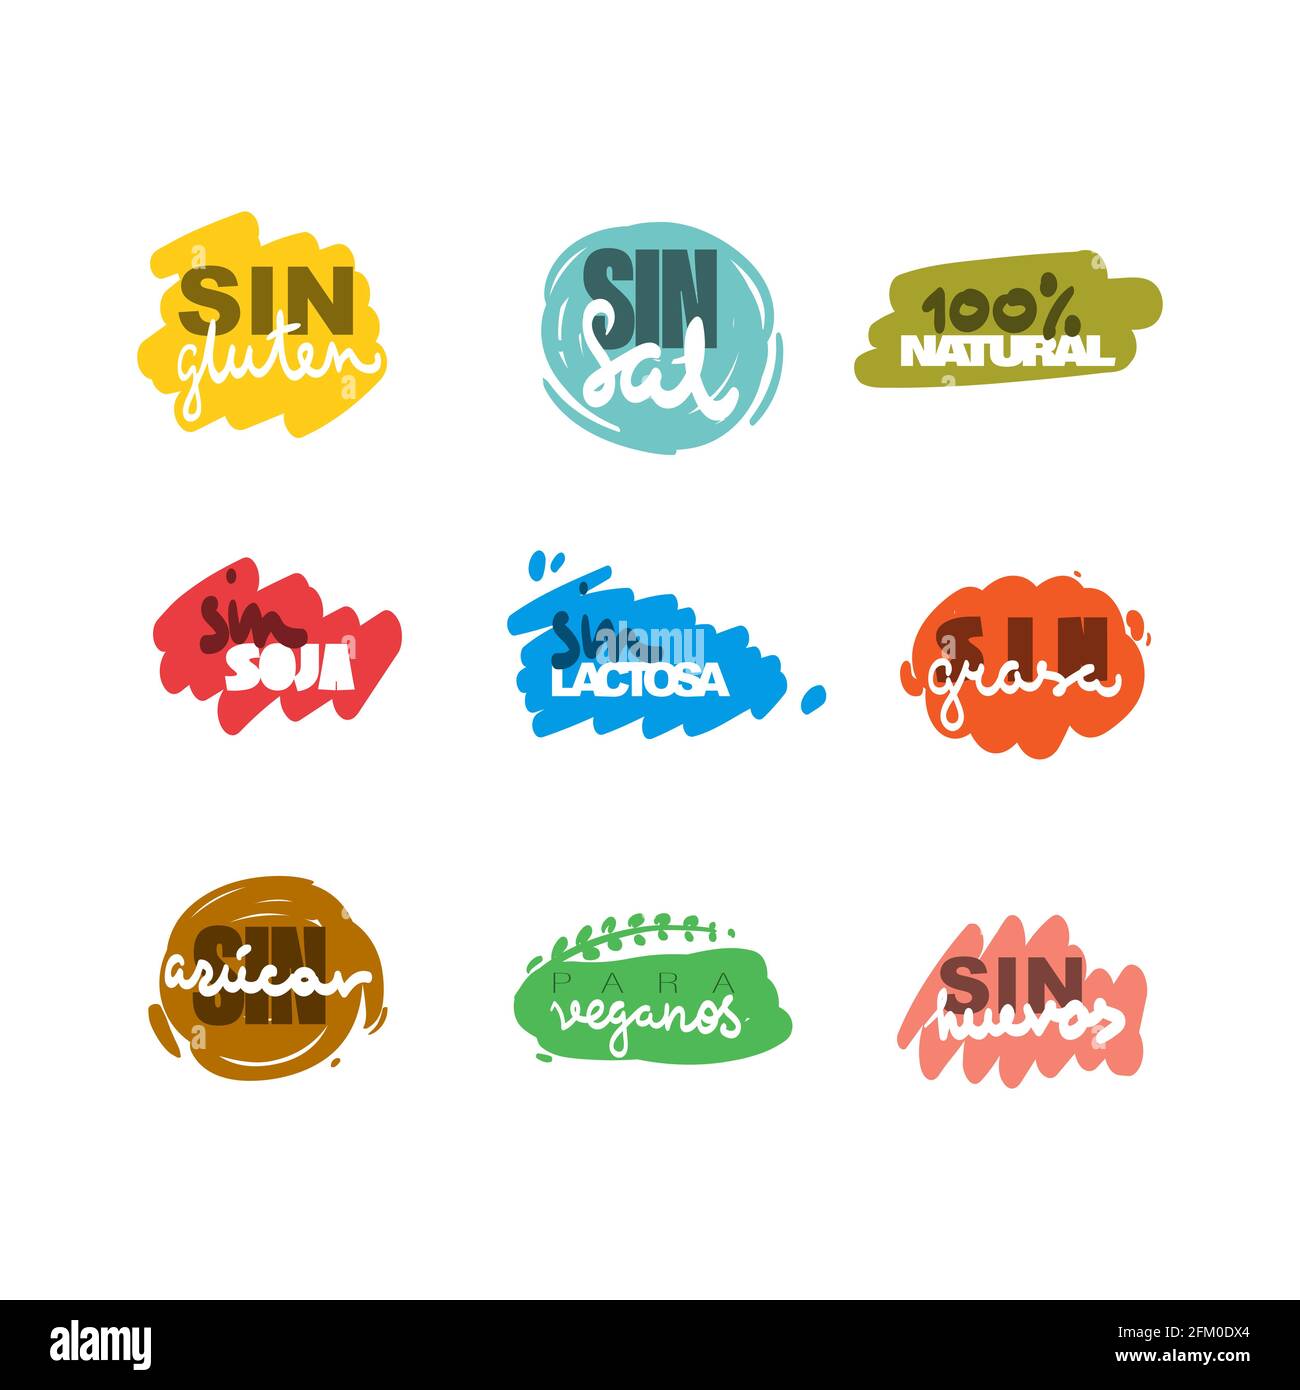 Food allergic icons set. Colored labels hand drawing in Spanish. Lactose free, sugar free, gluten free, salt free, egg free, soy free, fat free, veget Stock Vector